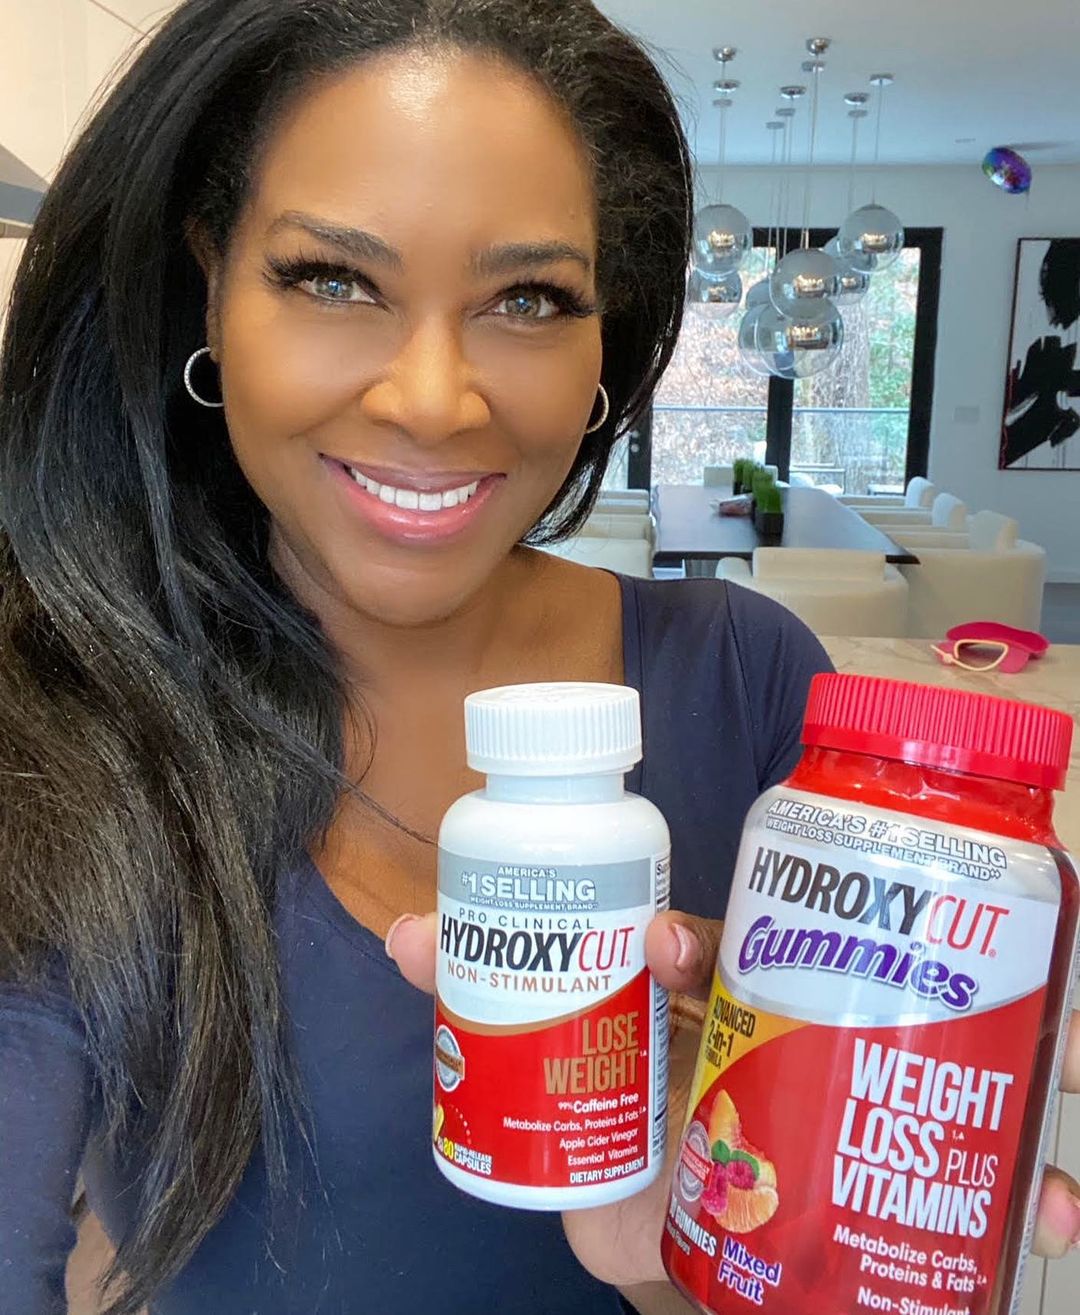 ACTOR and TV PERSONALITY KENYA MOORE PARTNERS WITH